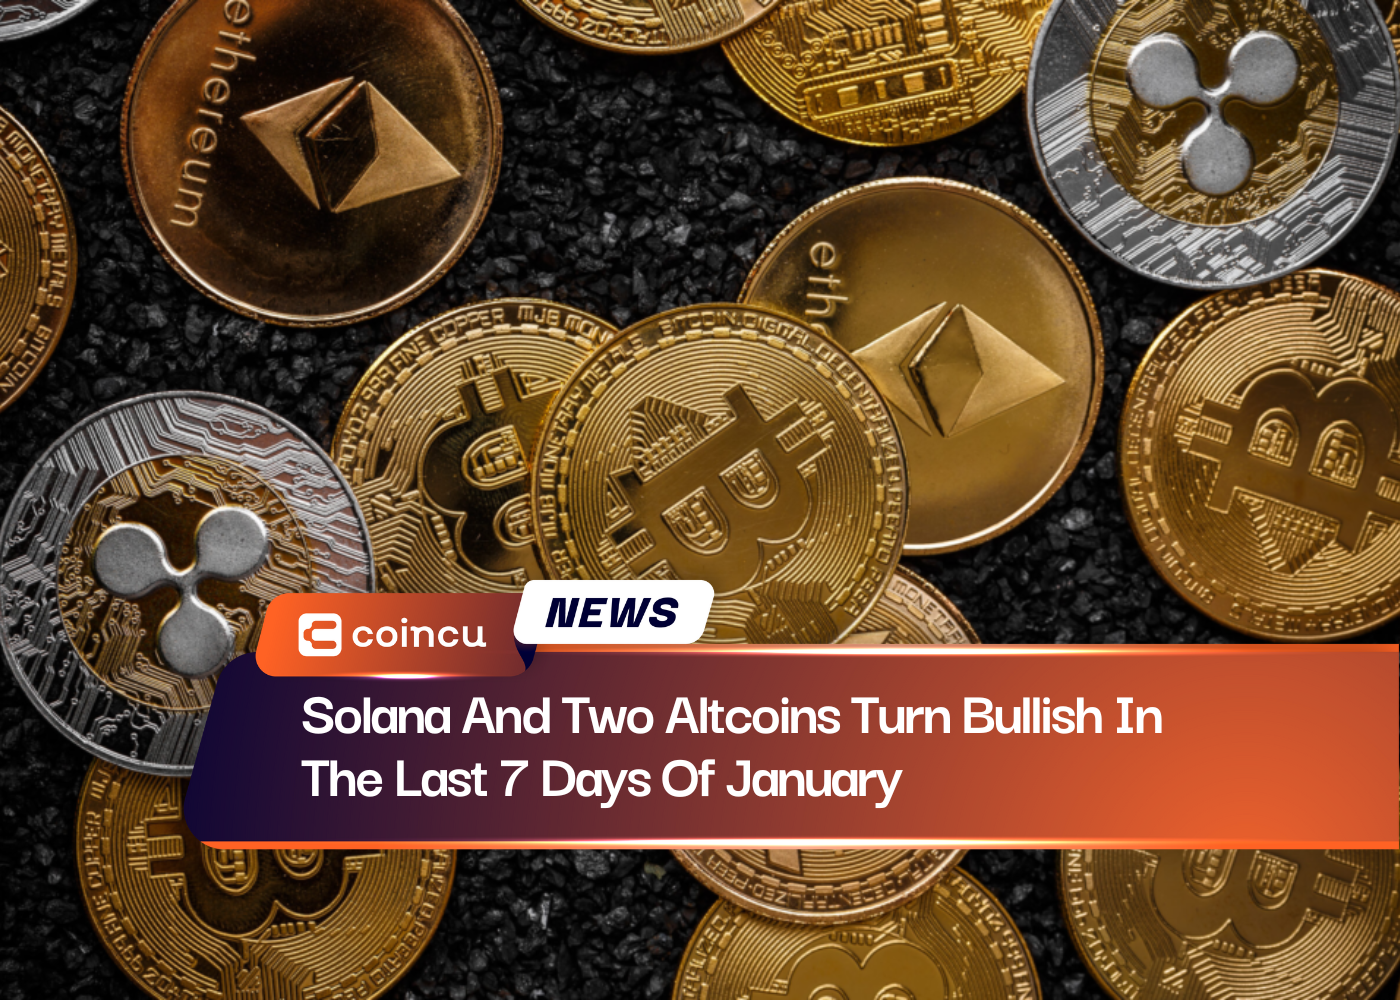 Solana And Two Altcoins Turn Bullish In The Last 7 Days Of January